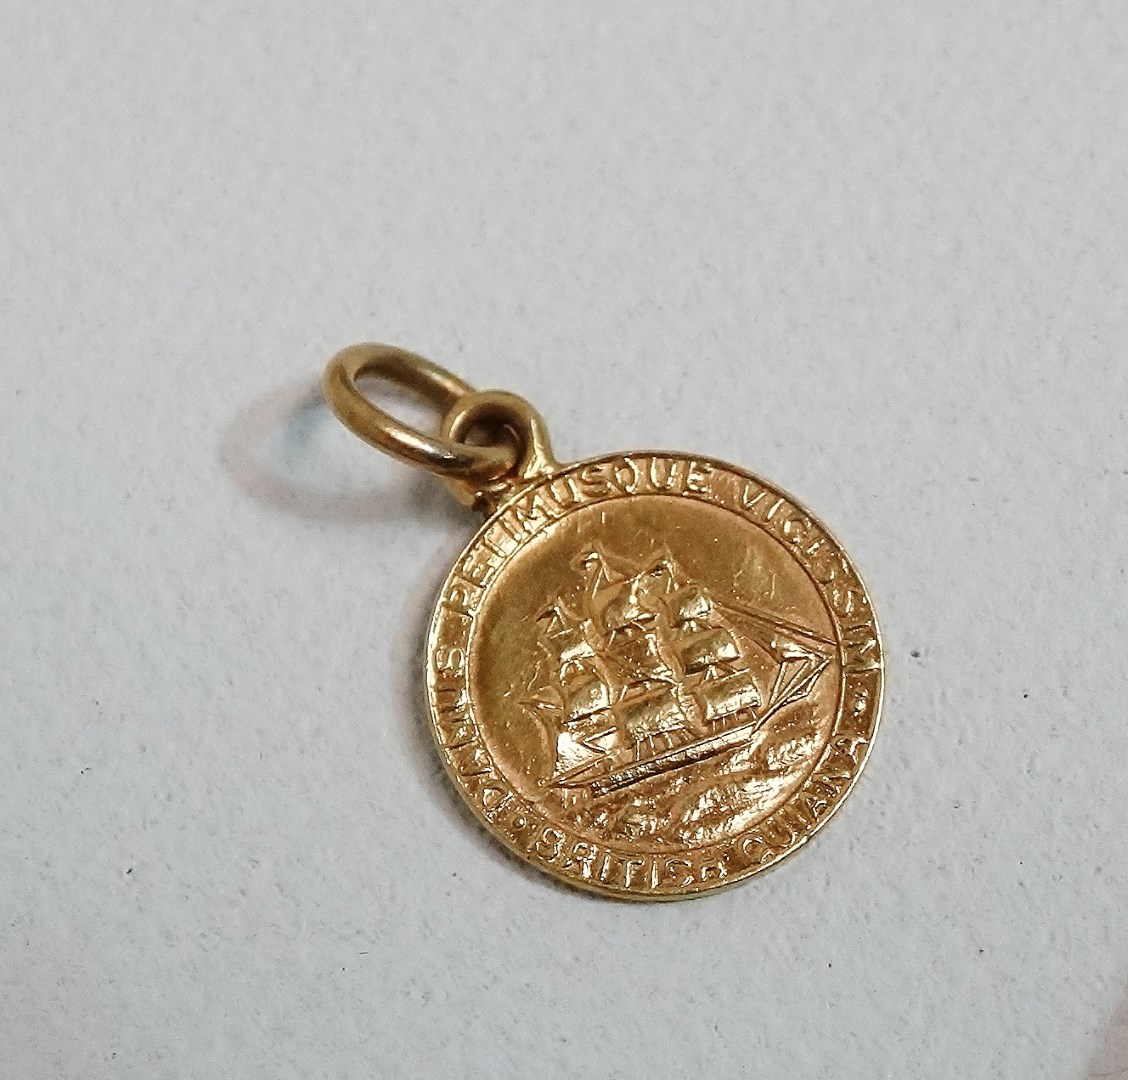 A West Indies British Guiana gold 'dollar' souvenir madalet - mounted on a suspension ring, undated, - Image 7 of 7